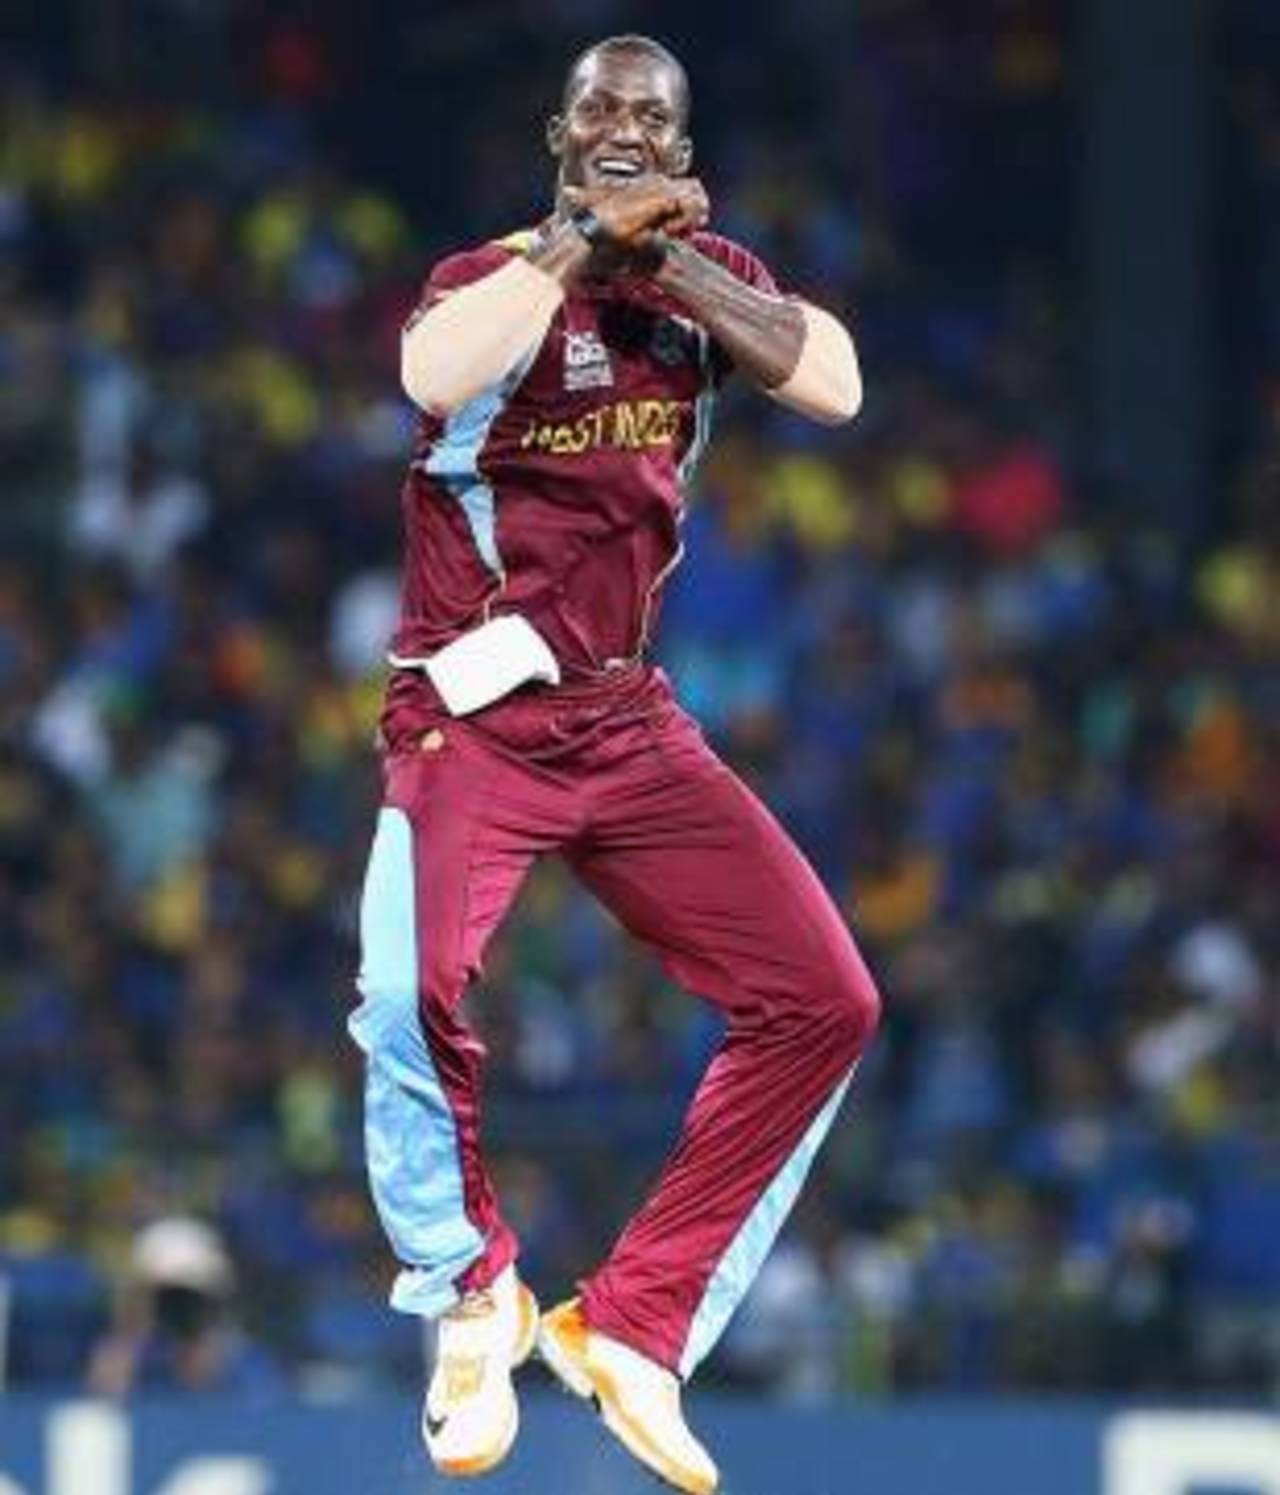 The joy is writ large on Darren Sammy's face, as he led his team to victory&nbsp;&nbsp;&bull;&nbsp;&nbsp;ICC/Getty